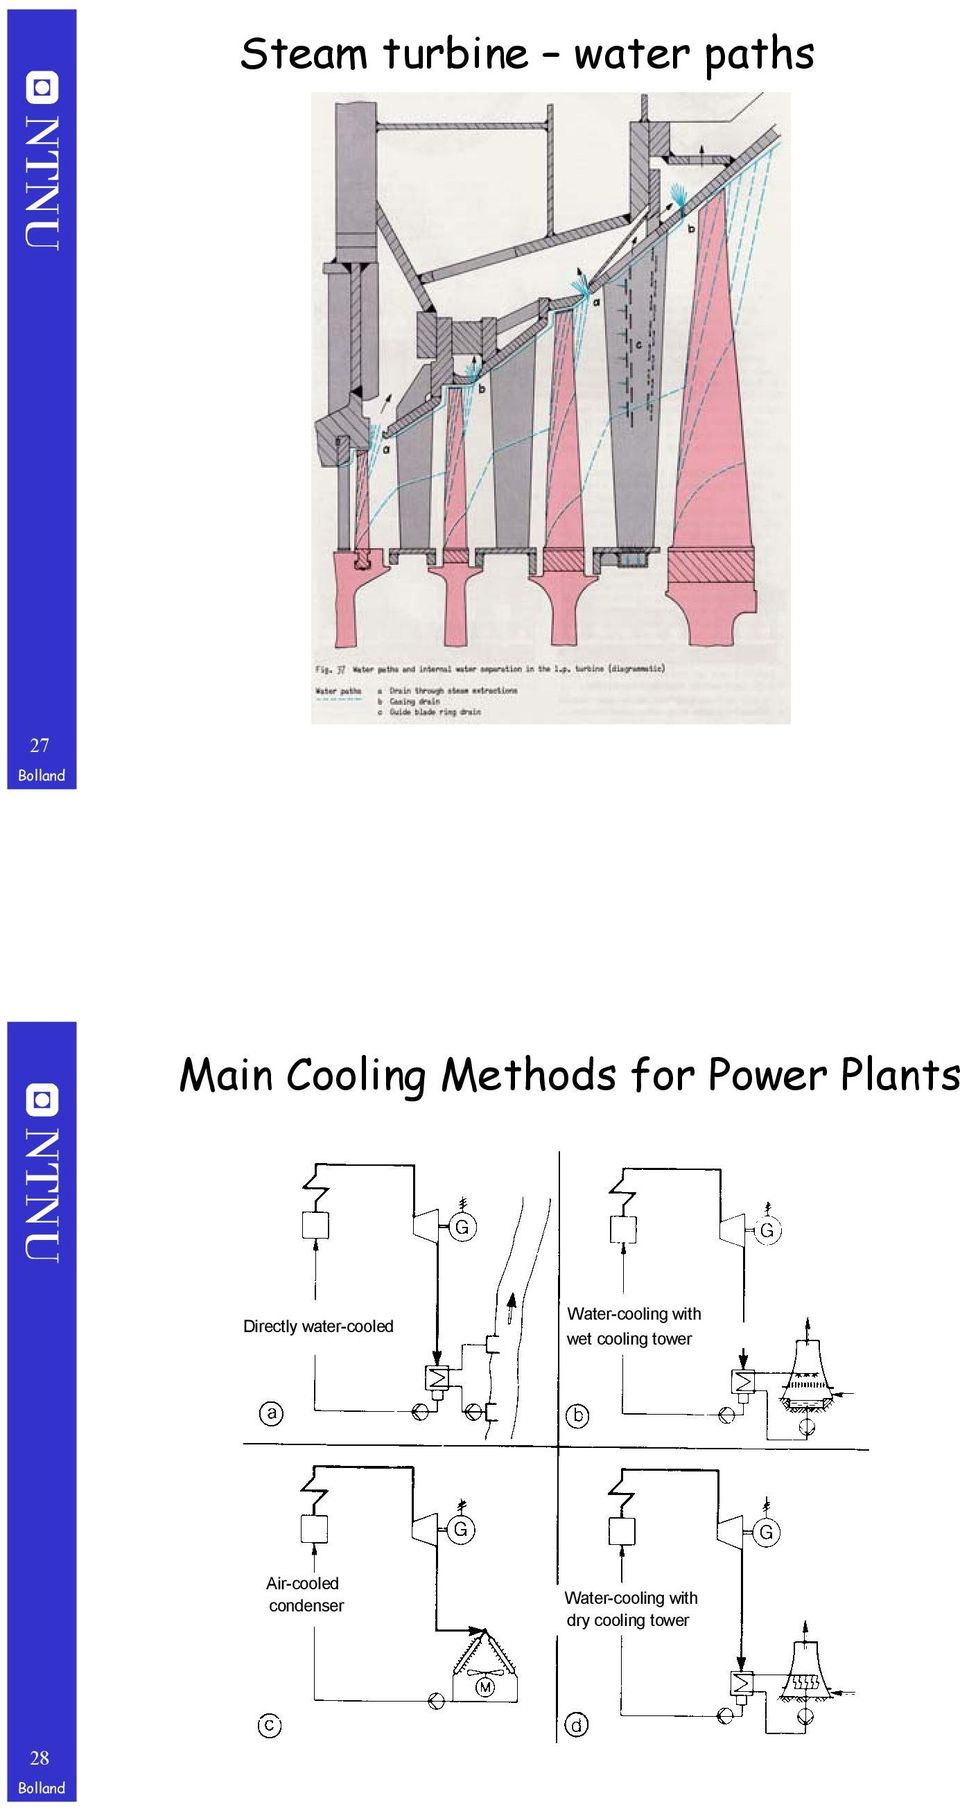 Water-cooling with wet cooling tower